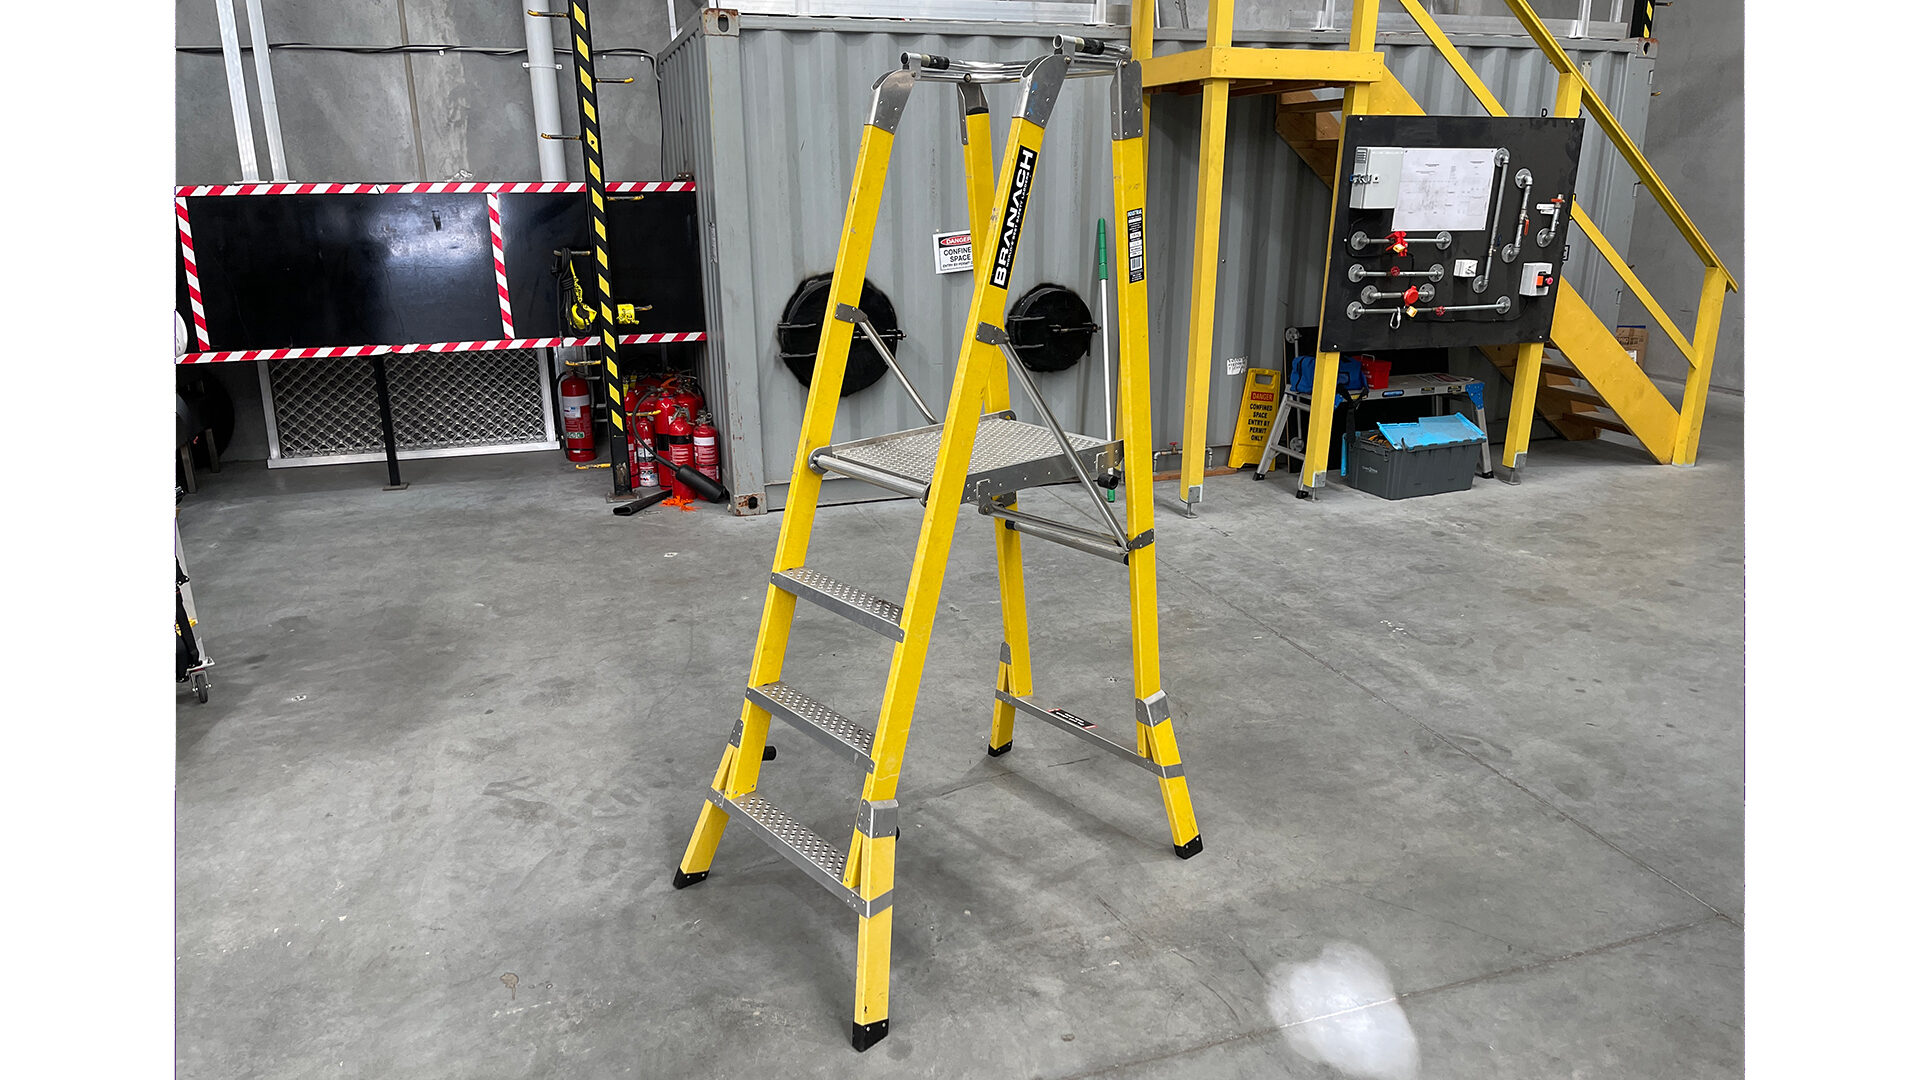 Portable step-type ladder on a warehouse floor.